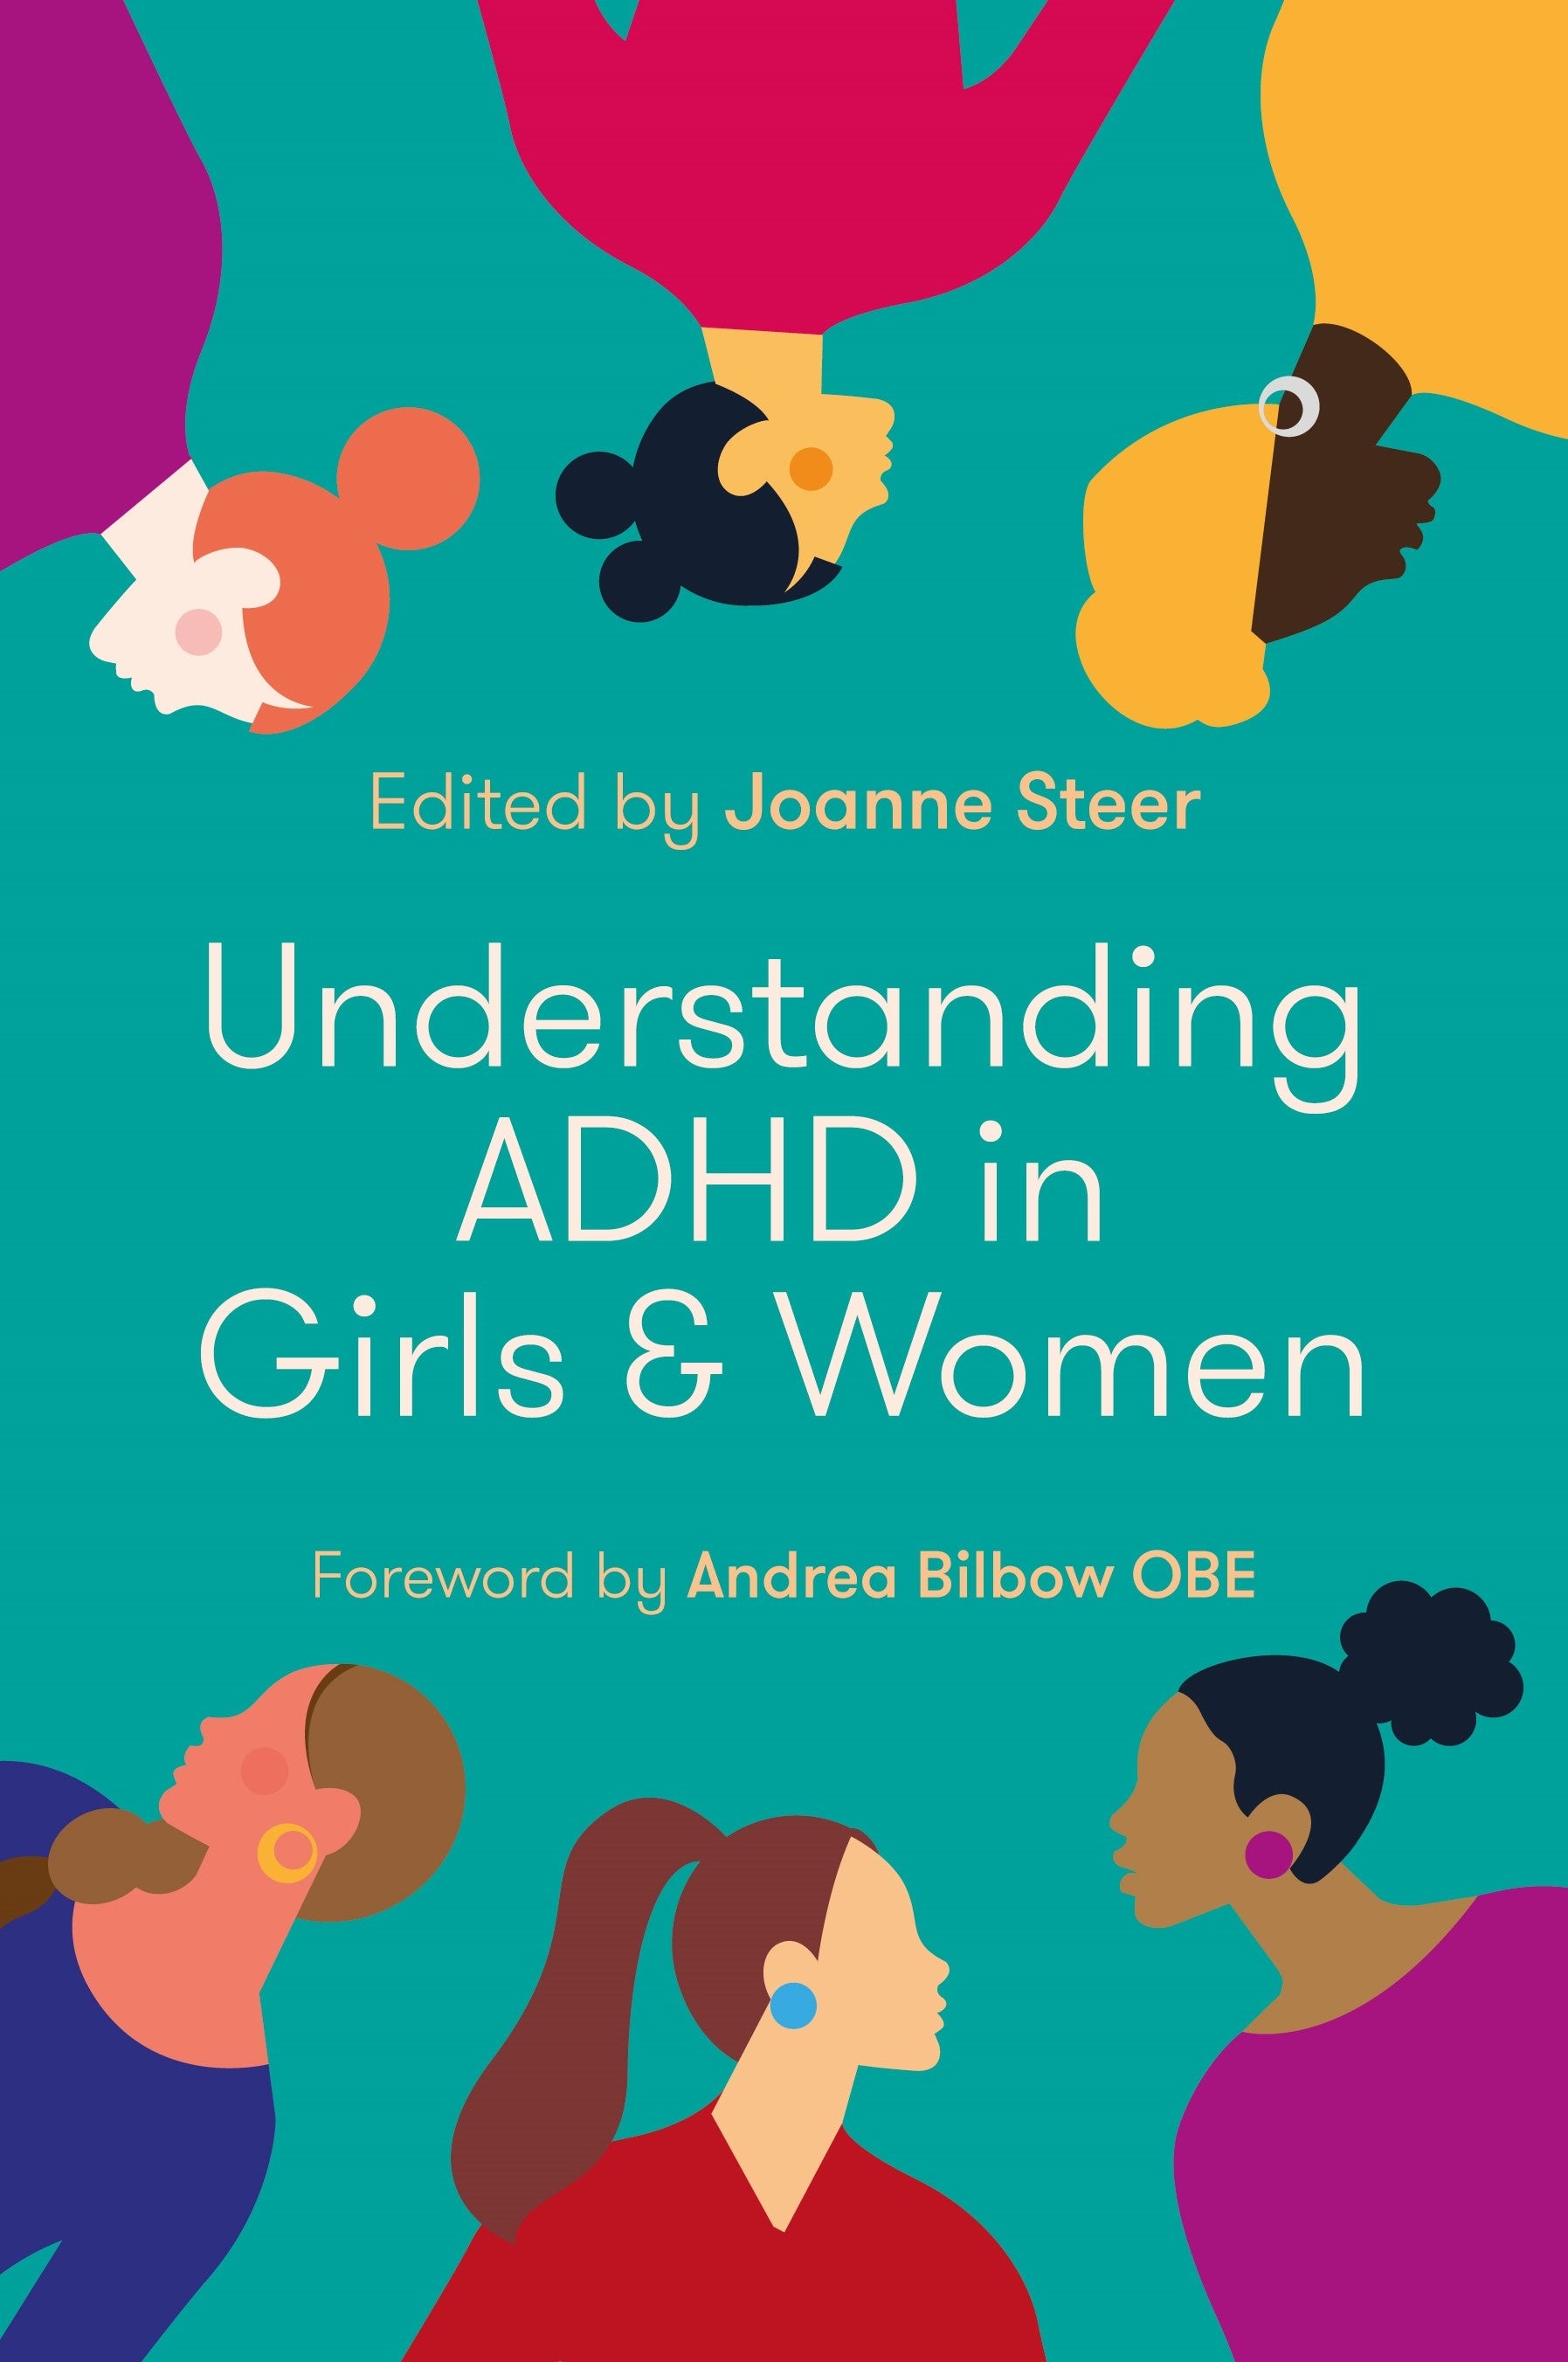 Understanding ADHD in Girls and Women by Joanne Steer, No Author Listed, Andrea Bilbow